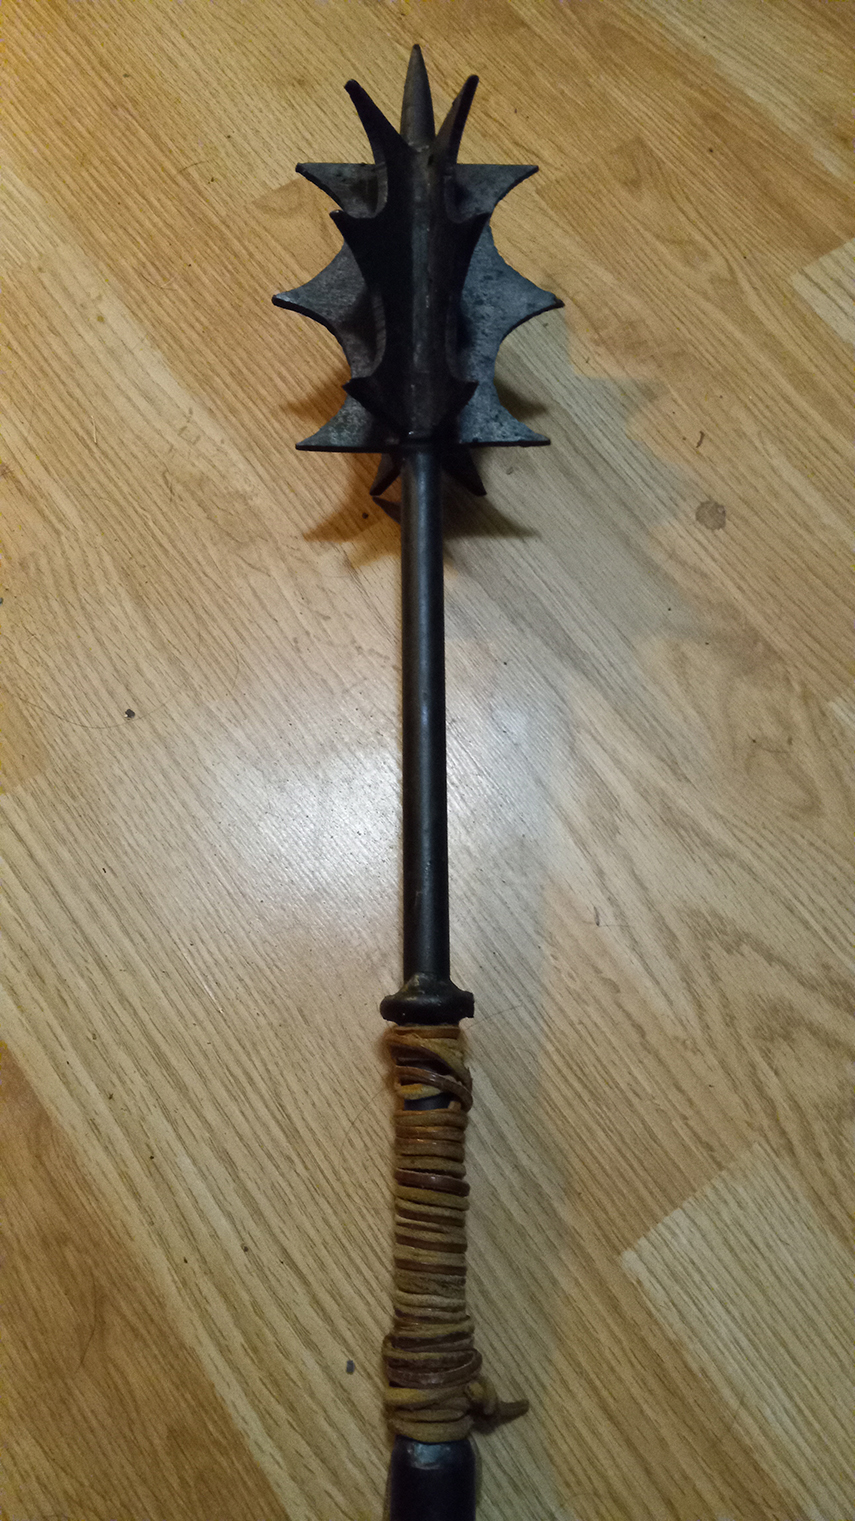 A wrought iron mace with sharp flanges and a spike against a wood floor